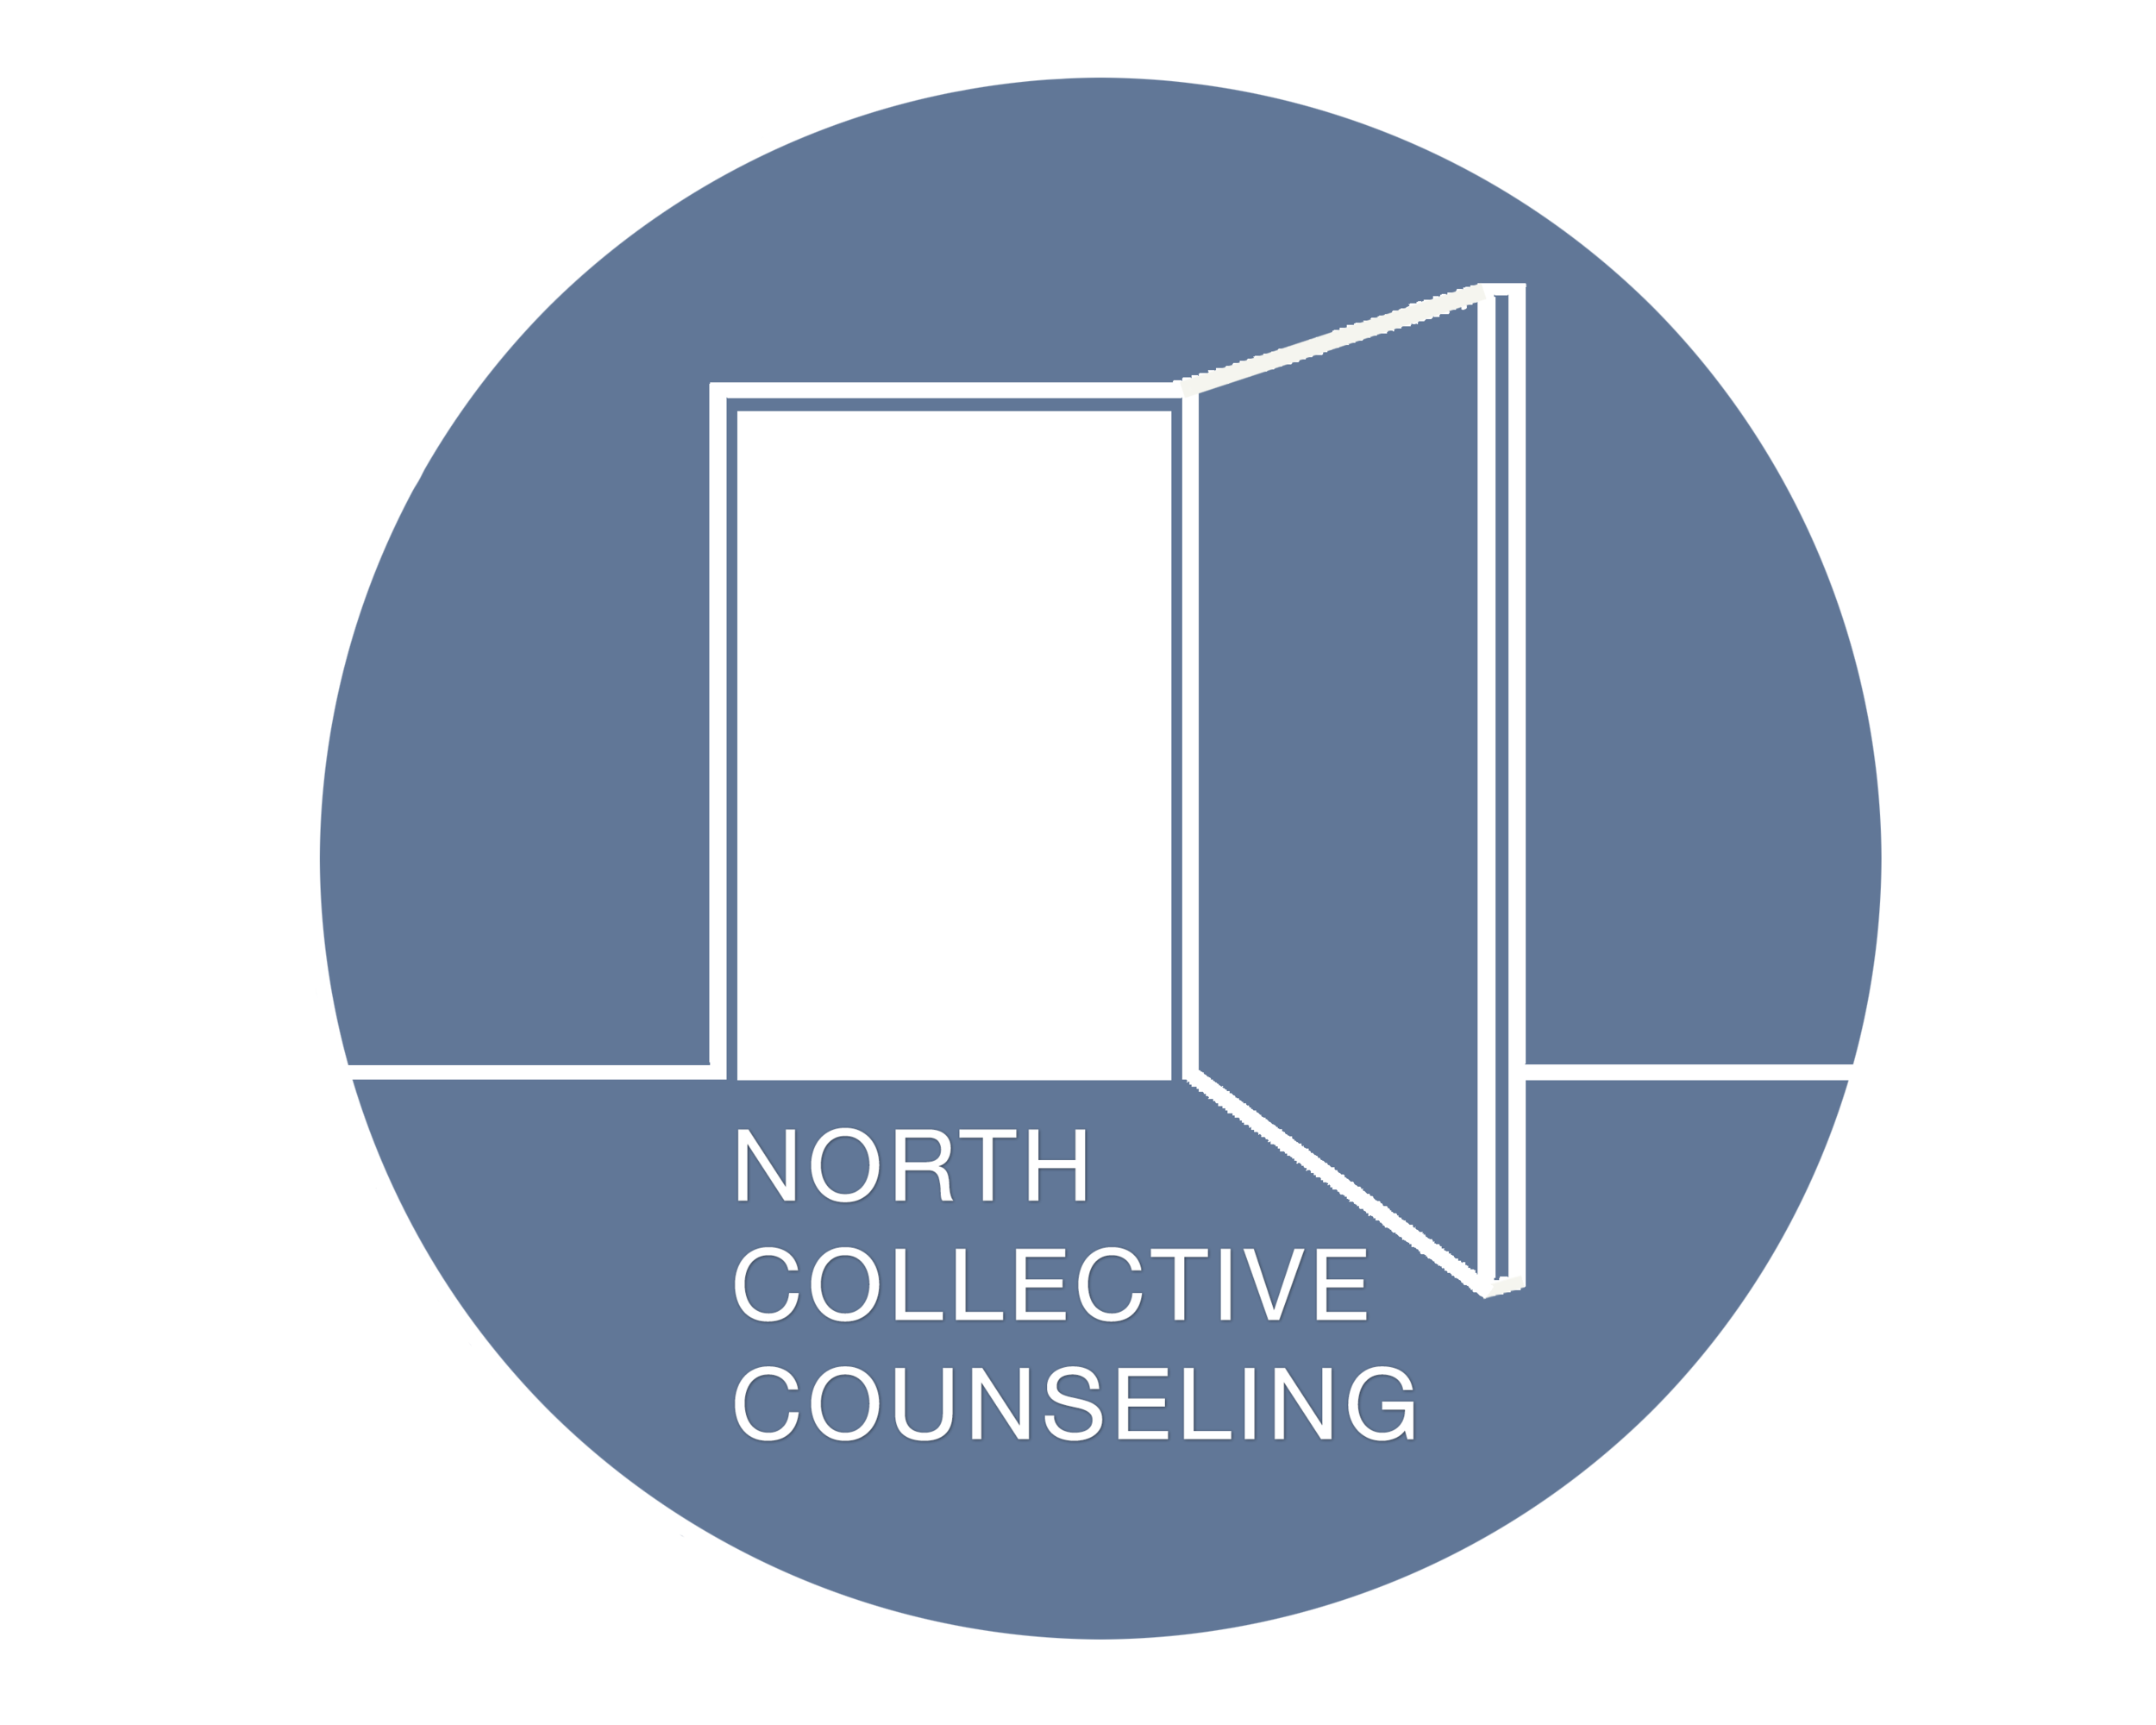 NORTH COLLECTIVE COUNSELING